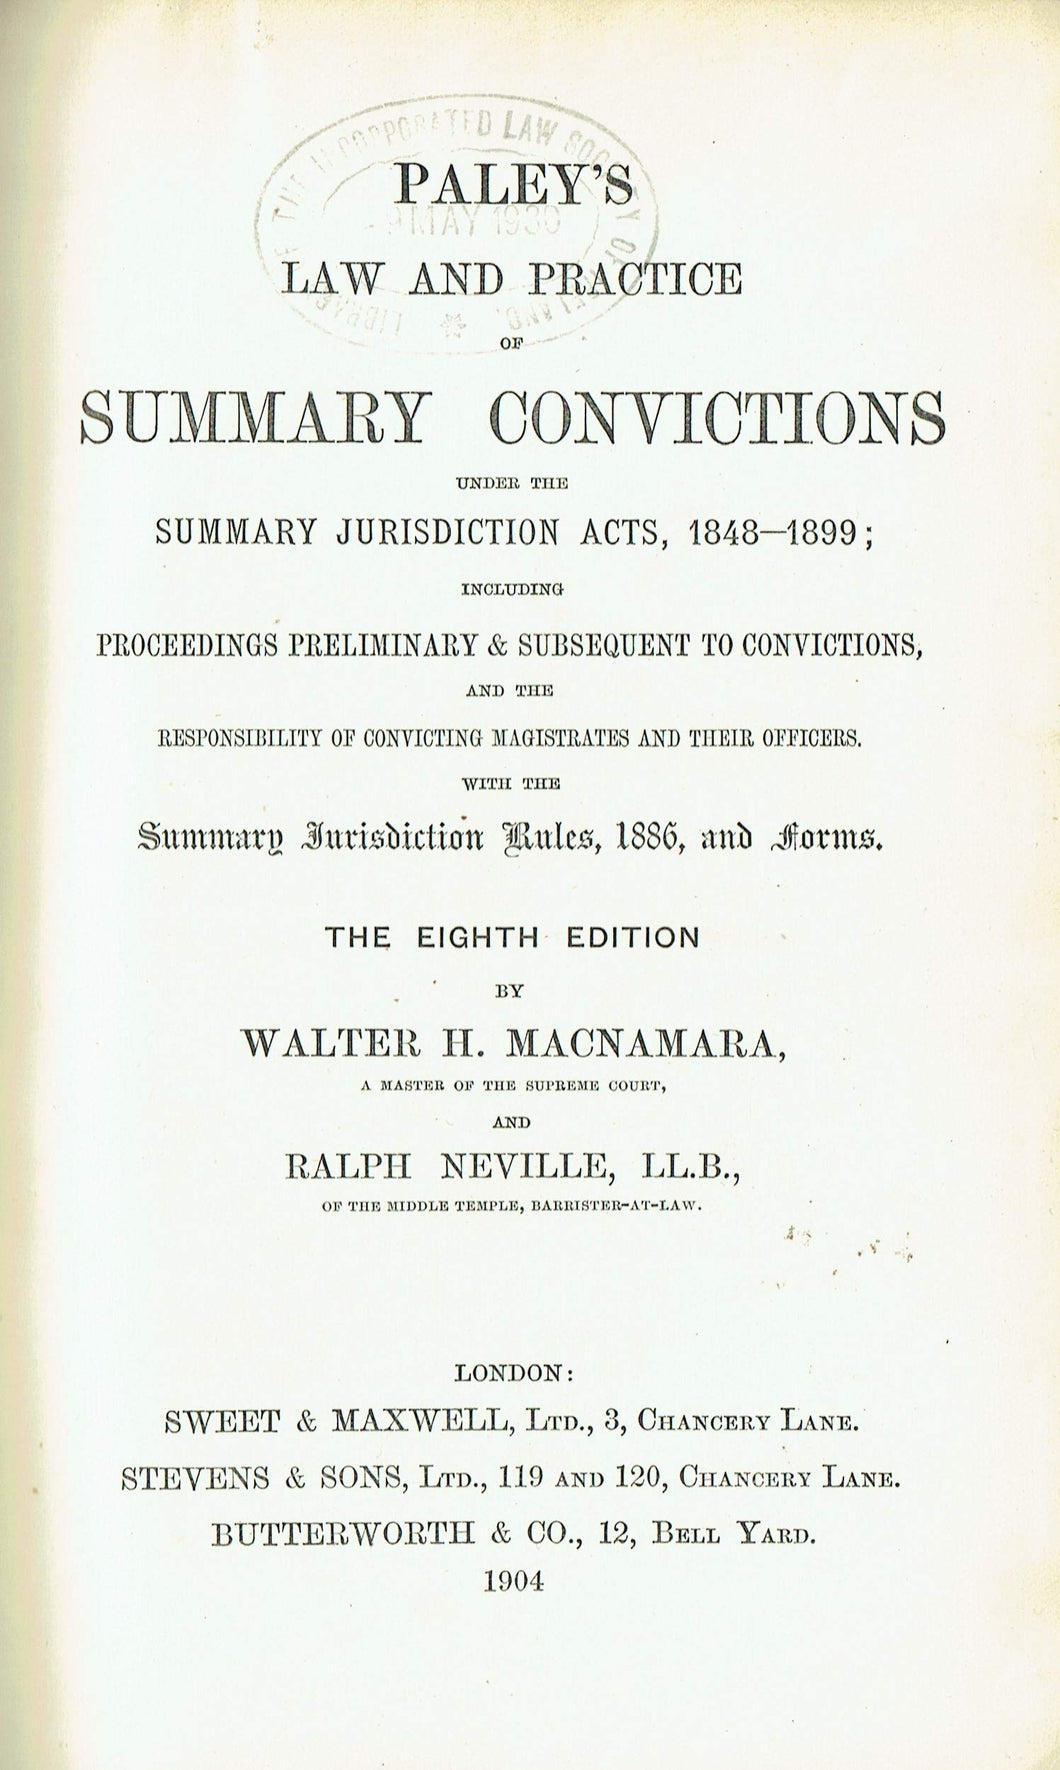 Paley's Law and Practice of Summary Convictions ... The eighth edition, by W. H. Macnamara ... and R. Neville